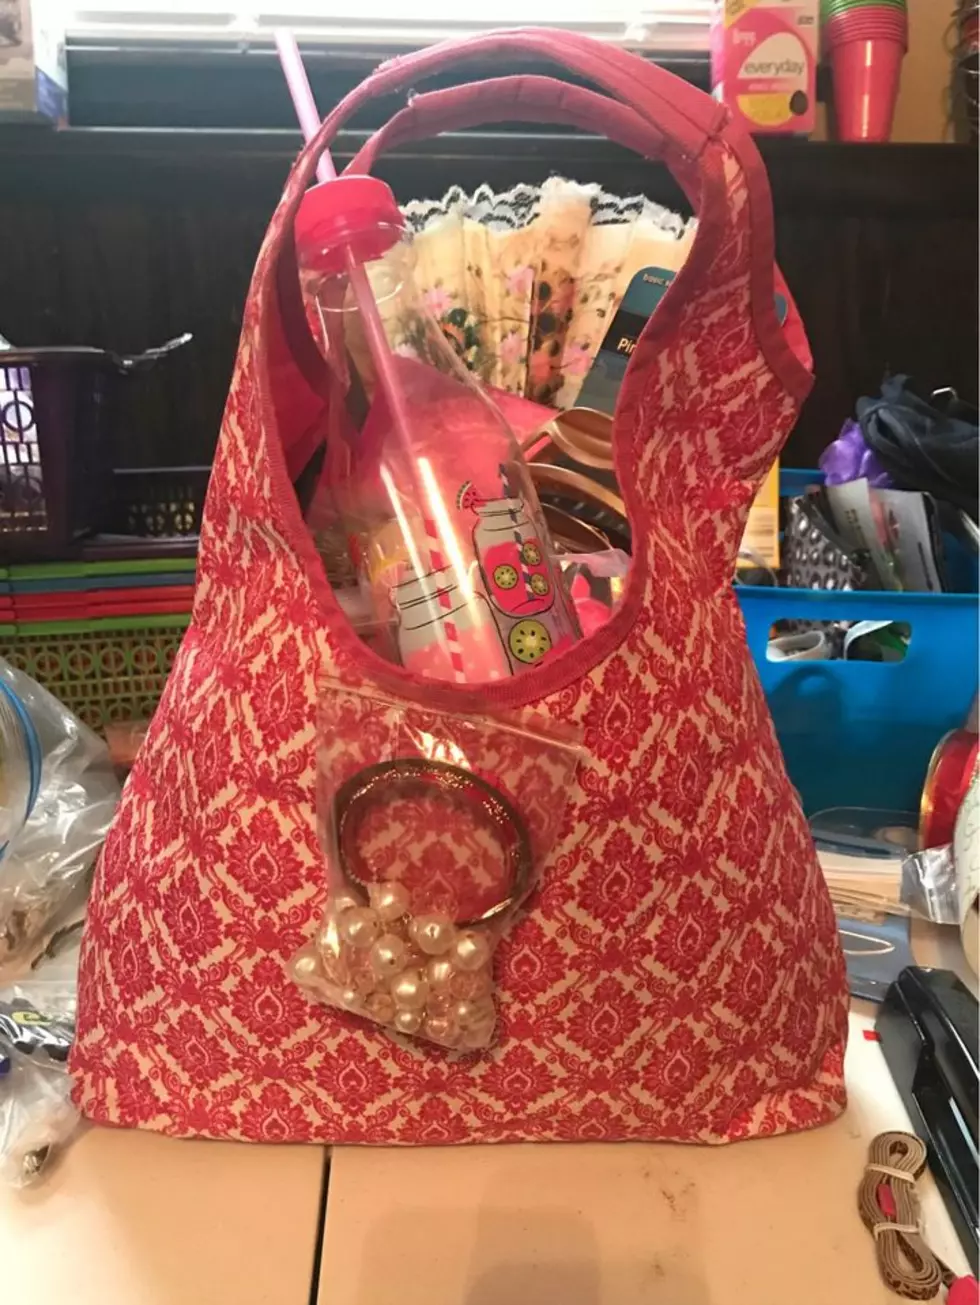 Belvidere Woman Looking for Purses for Holiday Gifts for Those in Need